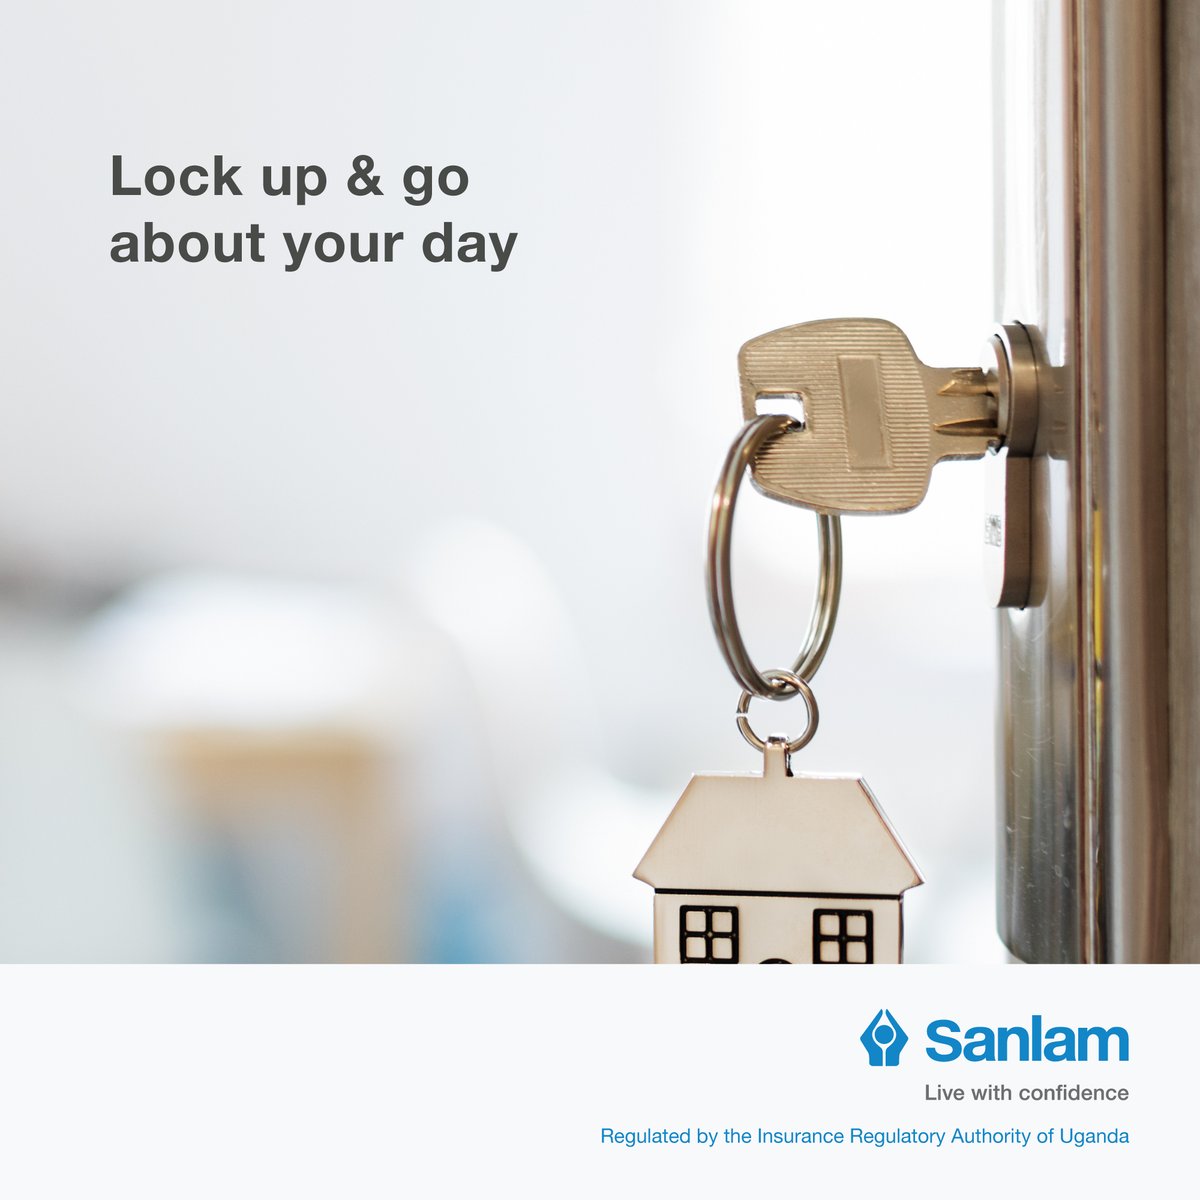 Protect your palace this weekend and leave the rest to us. Buy Sanlam Homeowners insurance by reaching out on WhatsApp 0759934102 OR Call 0312207000 #SanlamHouseHolderPolicy #LiveWithConfidence